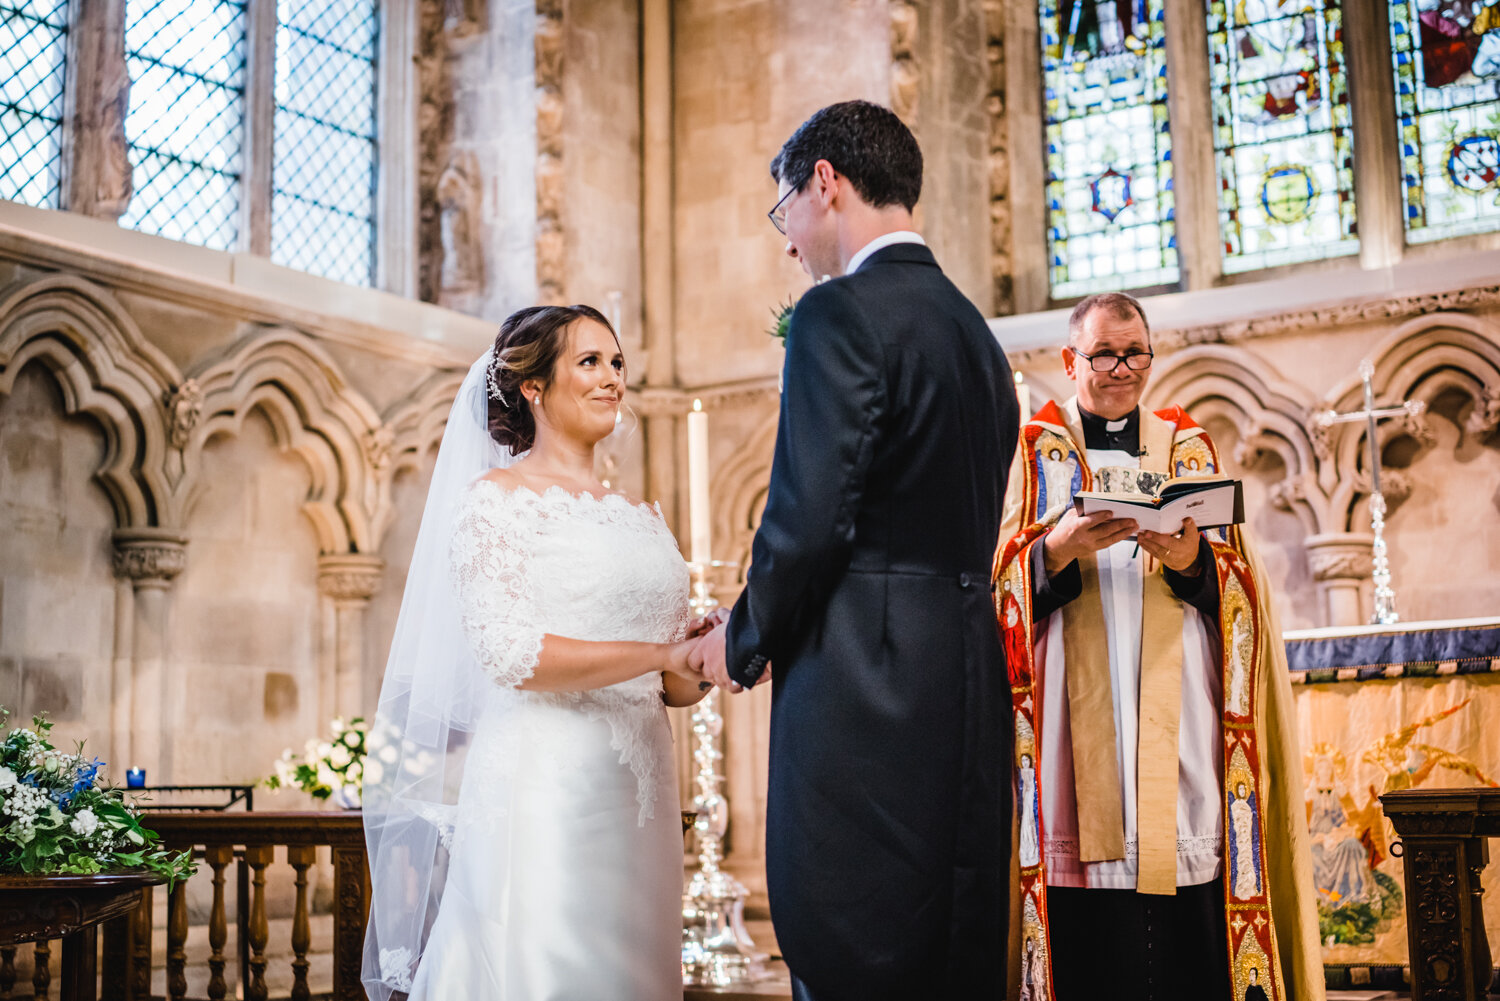 st-albans-cathedral-abbey-wedding-photos-pike-photography-164.jpg